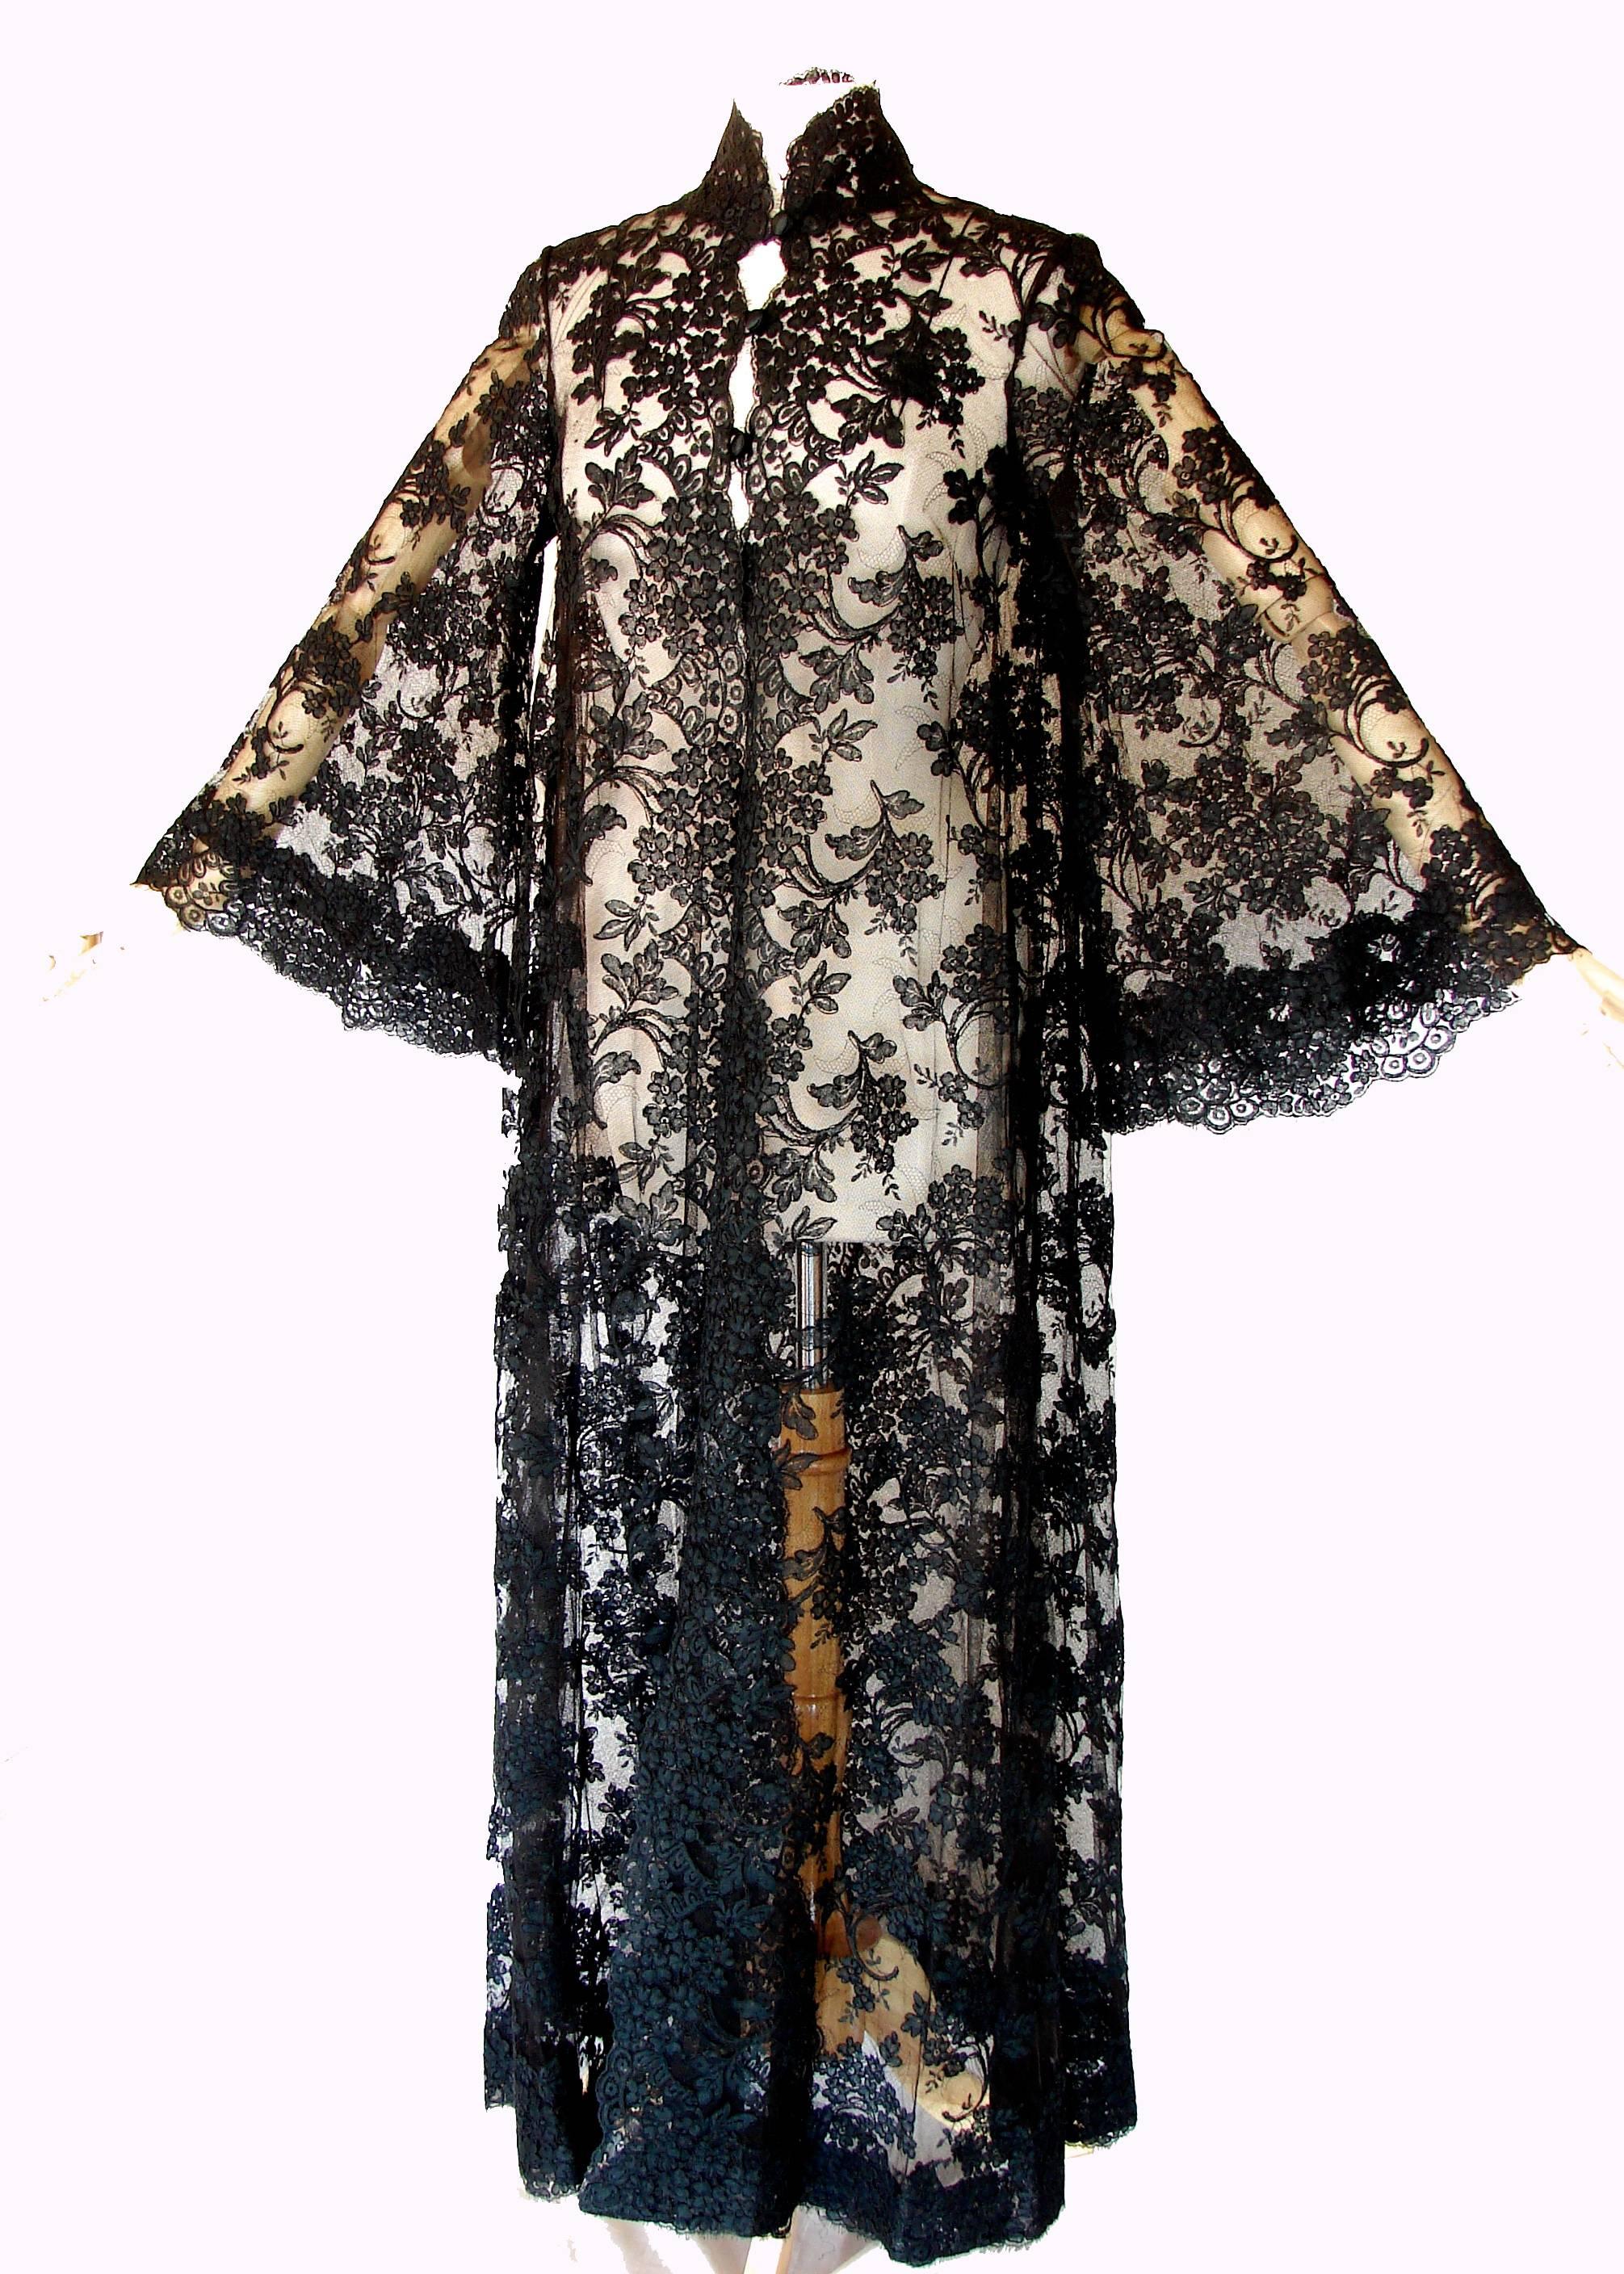 Ron Amey Attr. Fabulous Black Lace Opera Coat with Angel Sleeves Size M 1970s 2